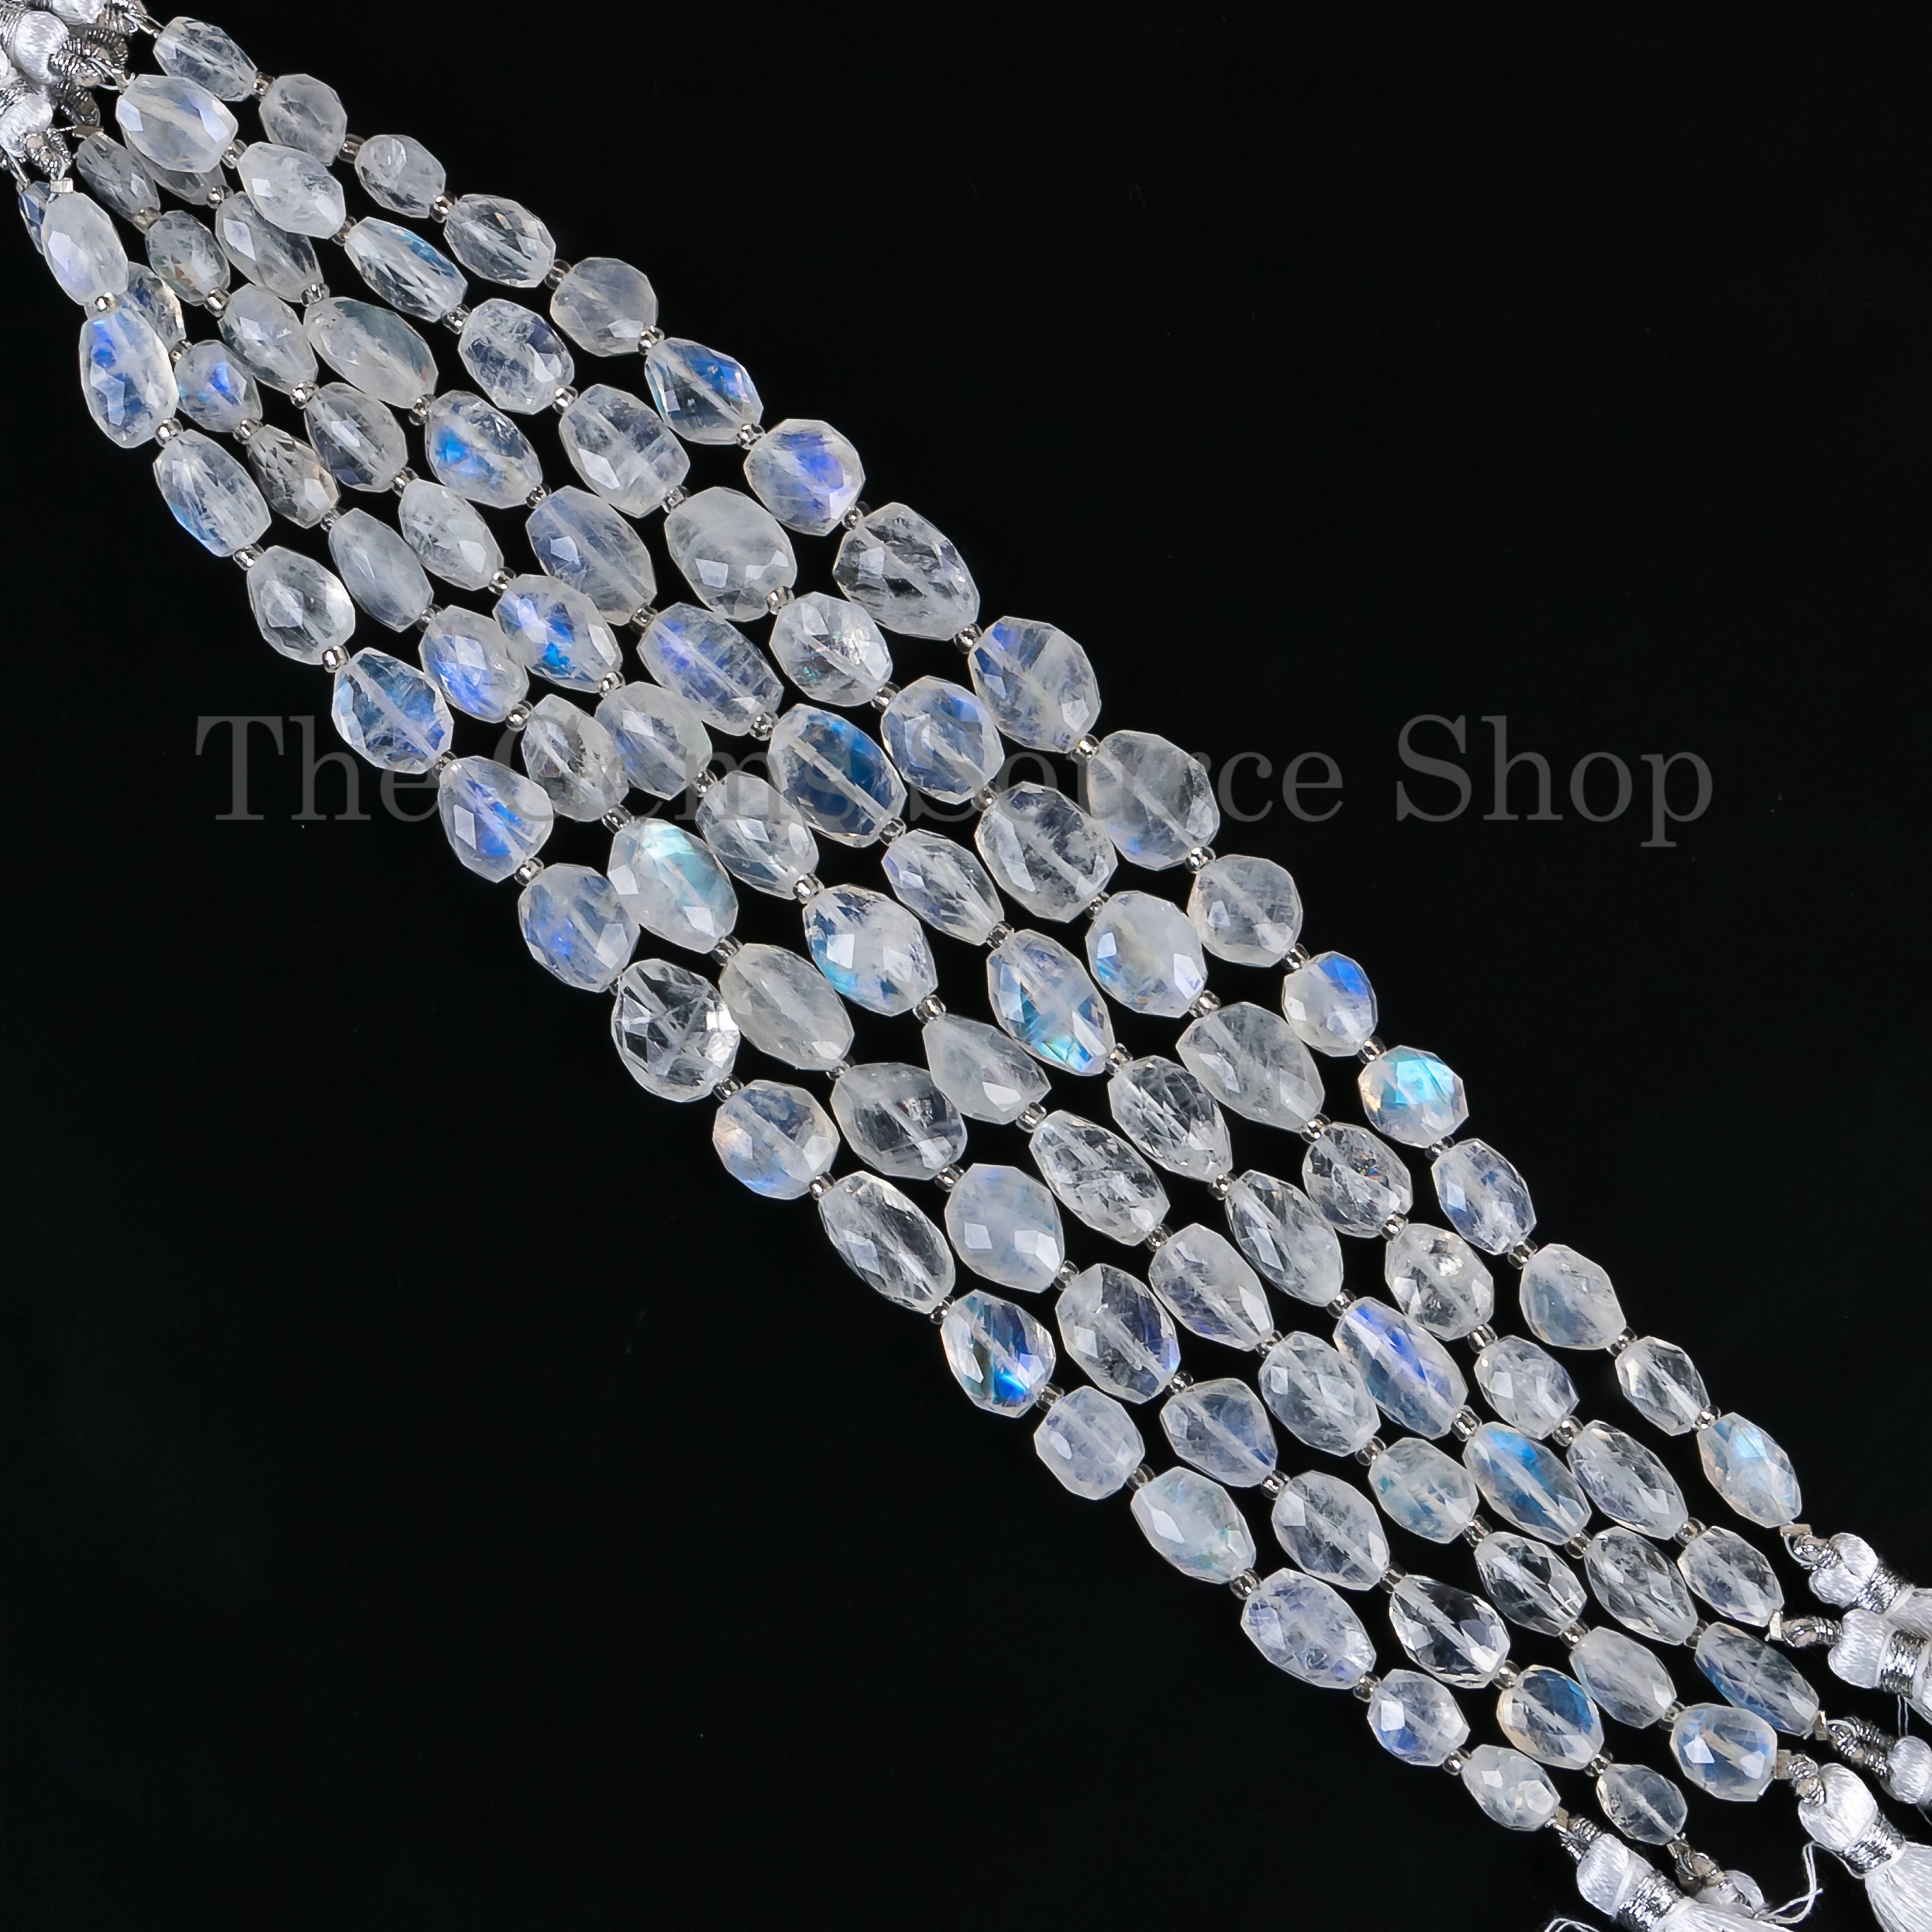 Rainbow Moonstone Fancy Nugget Shape Beads, Moonstone Faceted Beads